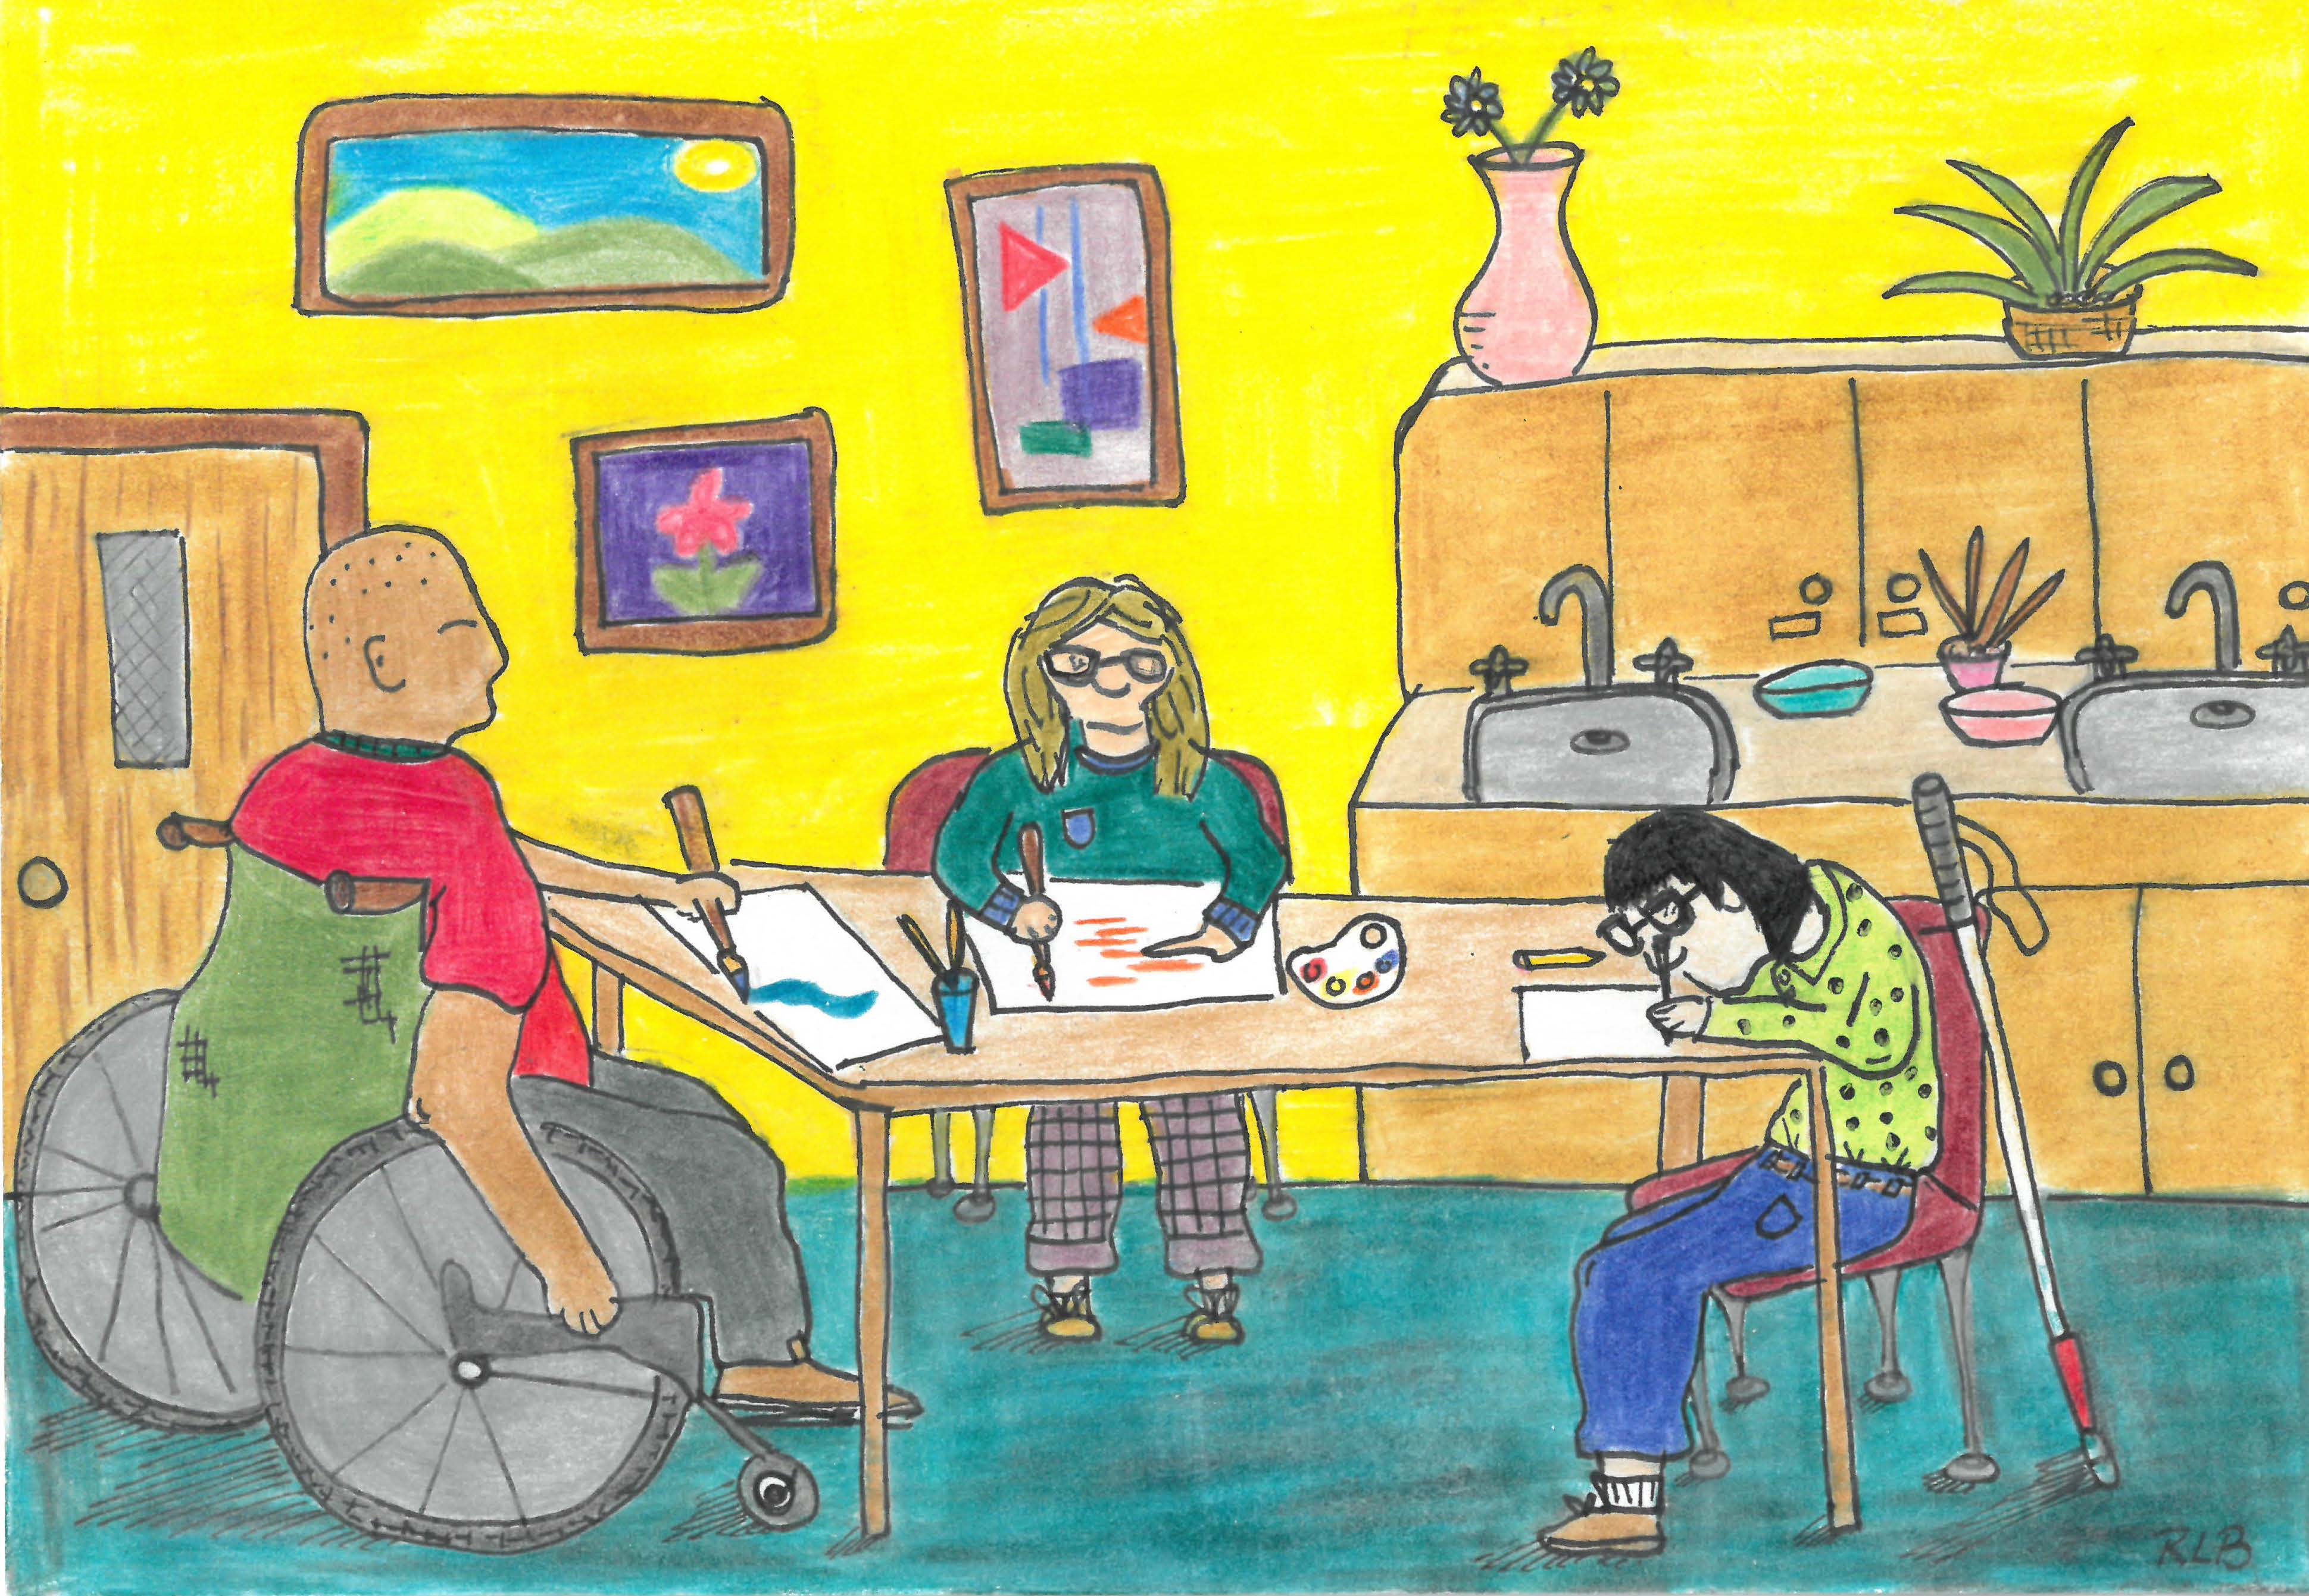 Image is an illustration of a man in a wheelchair, a Blind person, and a third person creating art together at a table.